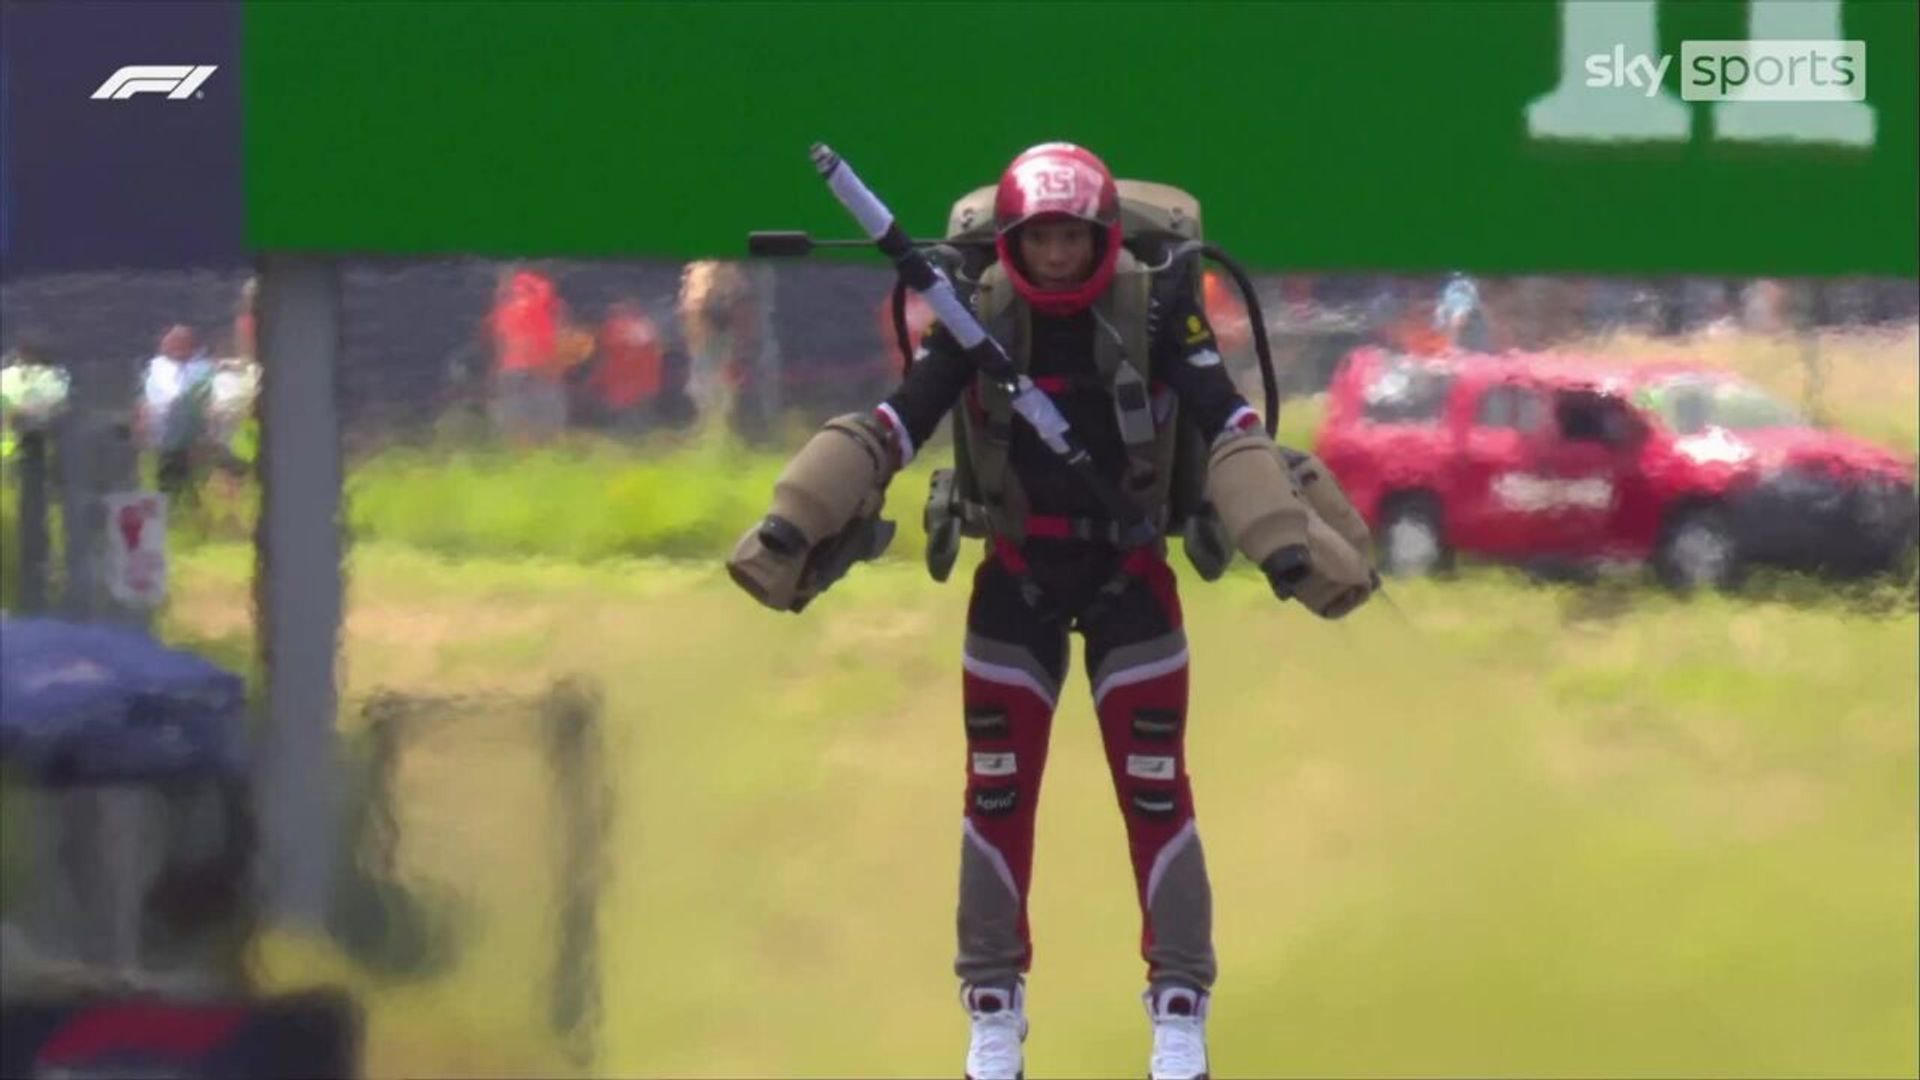 Hover suit howler! | Jetpack man takes a tumble at F1 Austria